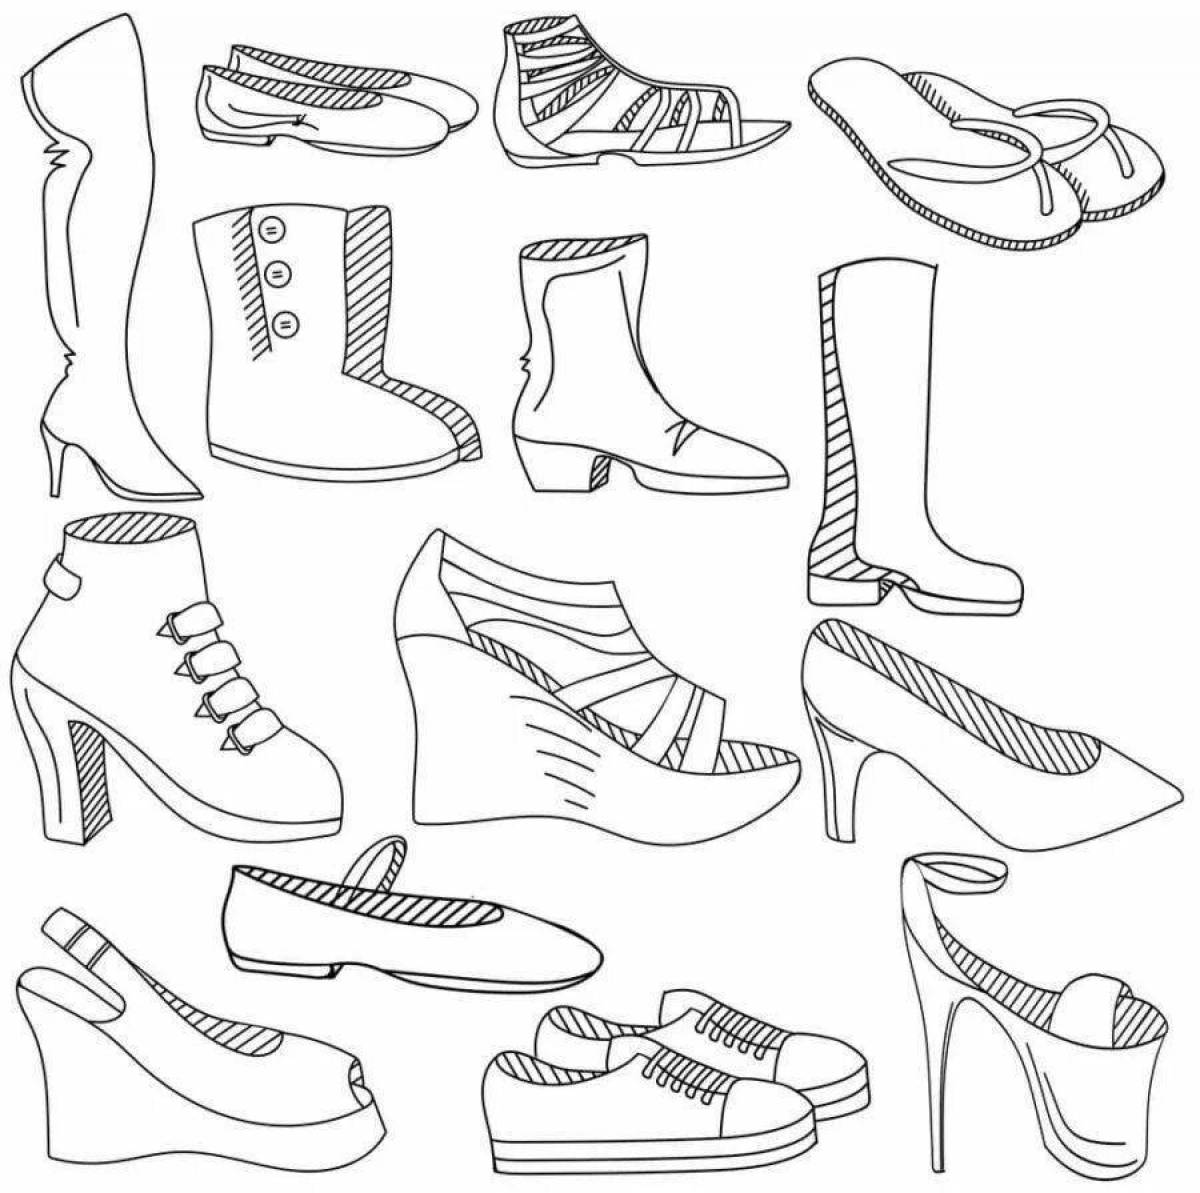 Coloring page nice shoes for children 5-6 years old